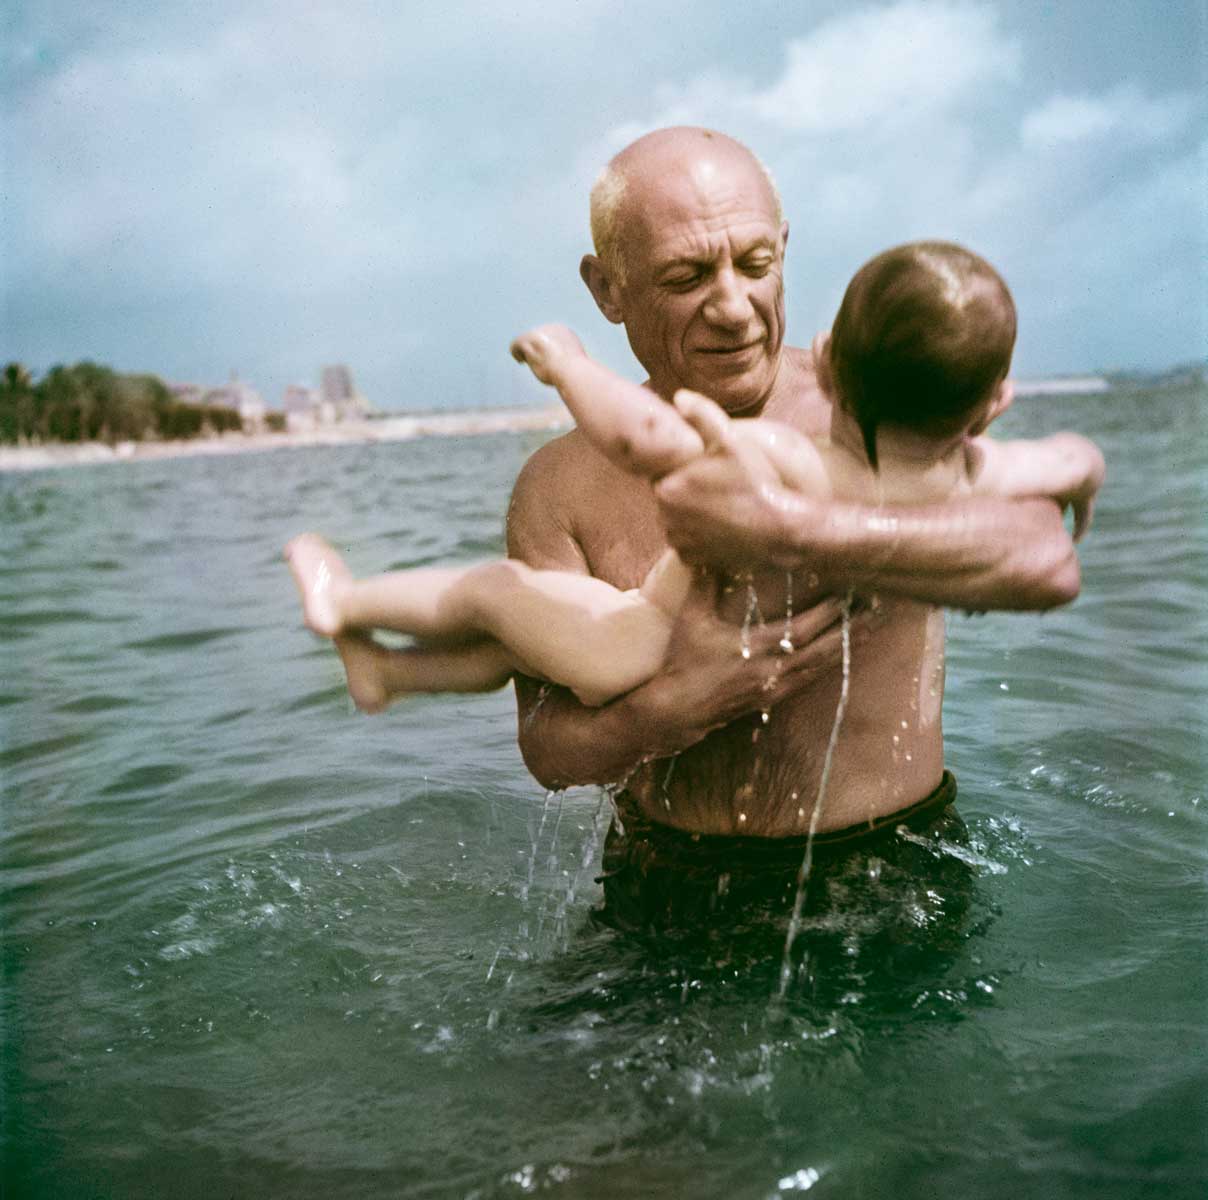 Pablo Picasso playing in the water with his son Claude, Vallauris, France, 1948.